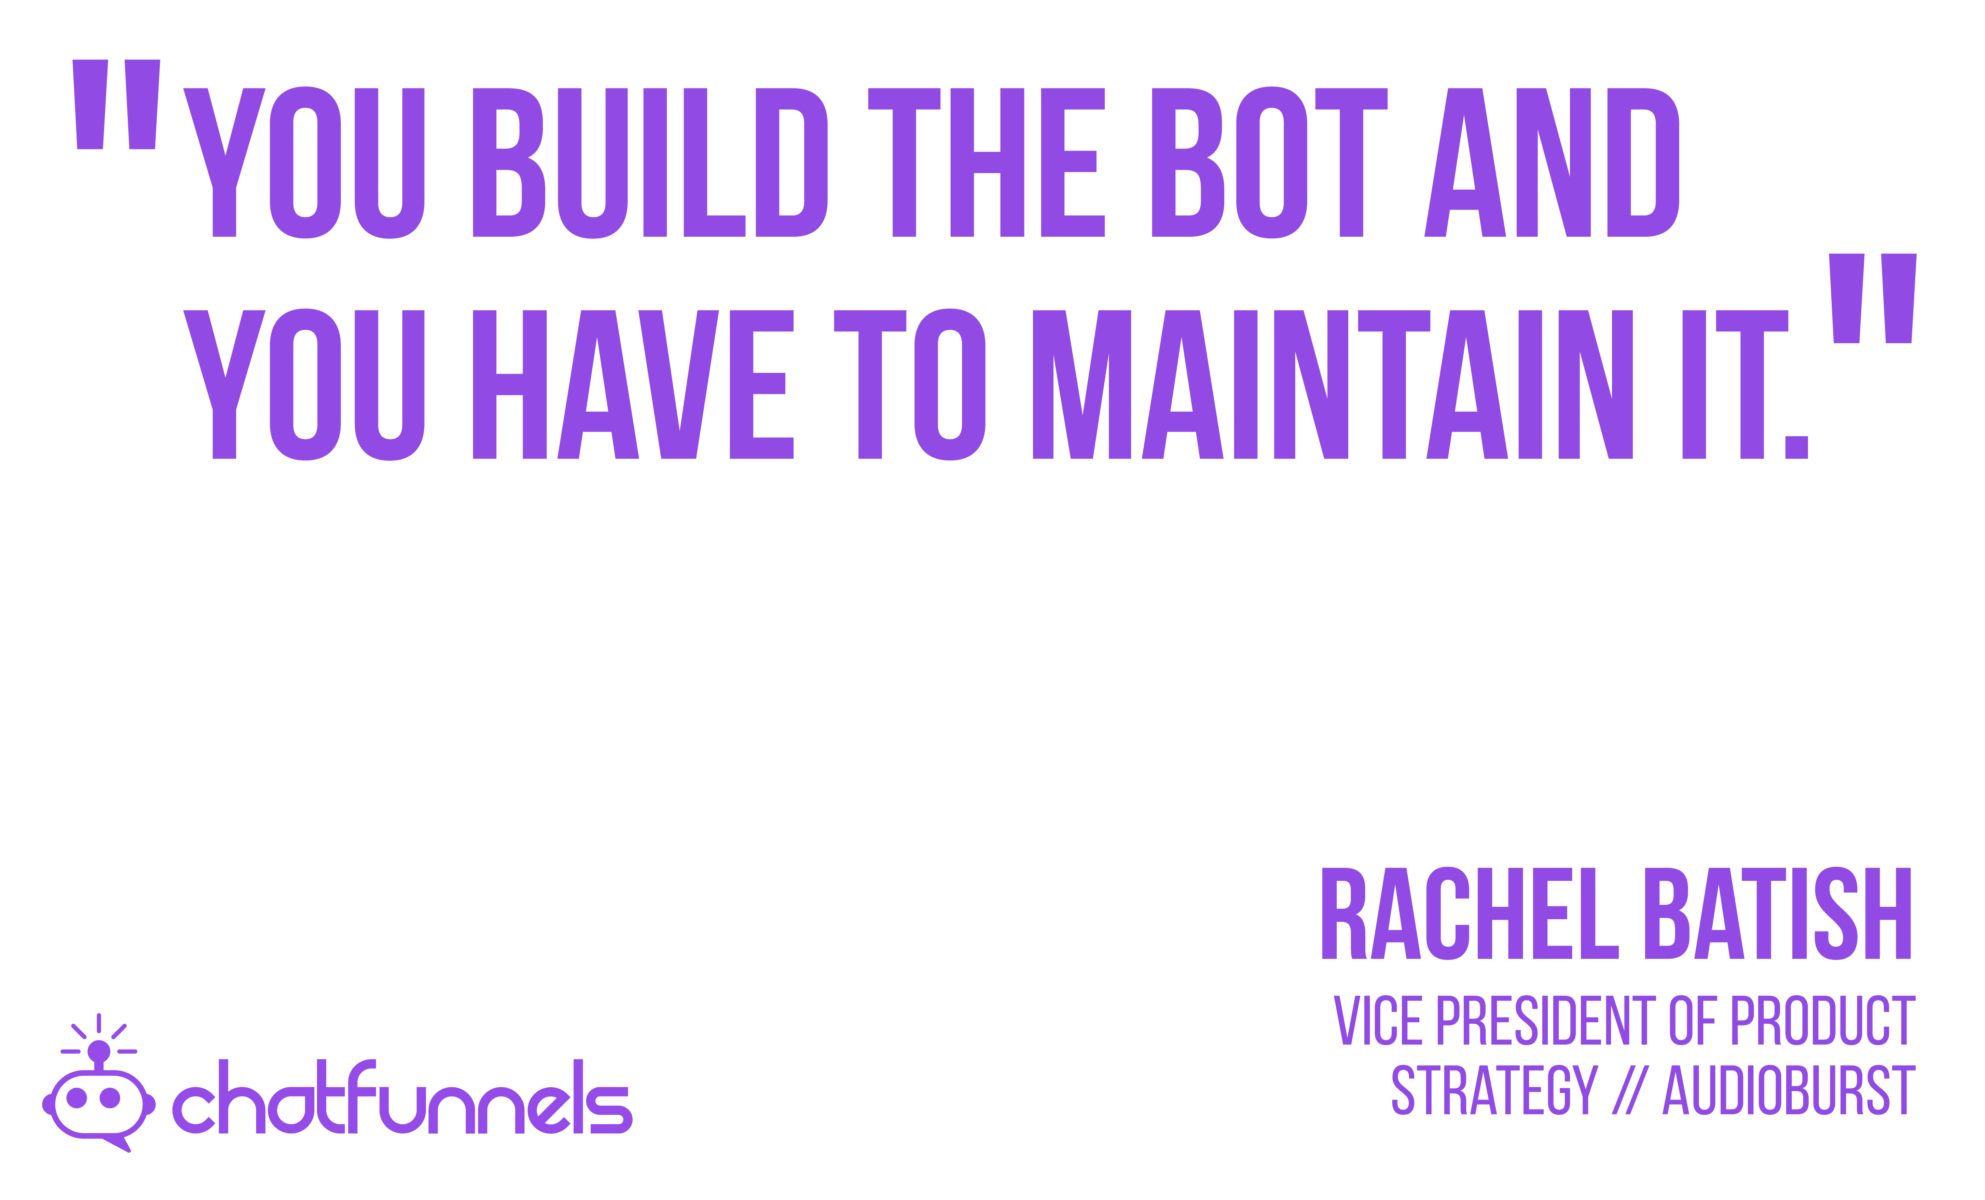 You build the bot and you have to maintain it.